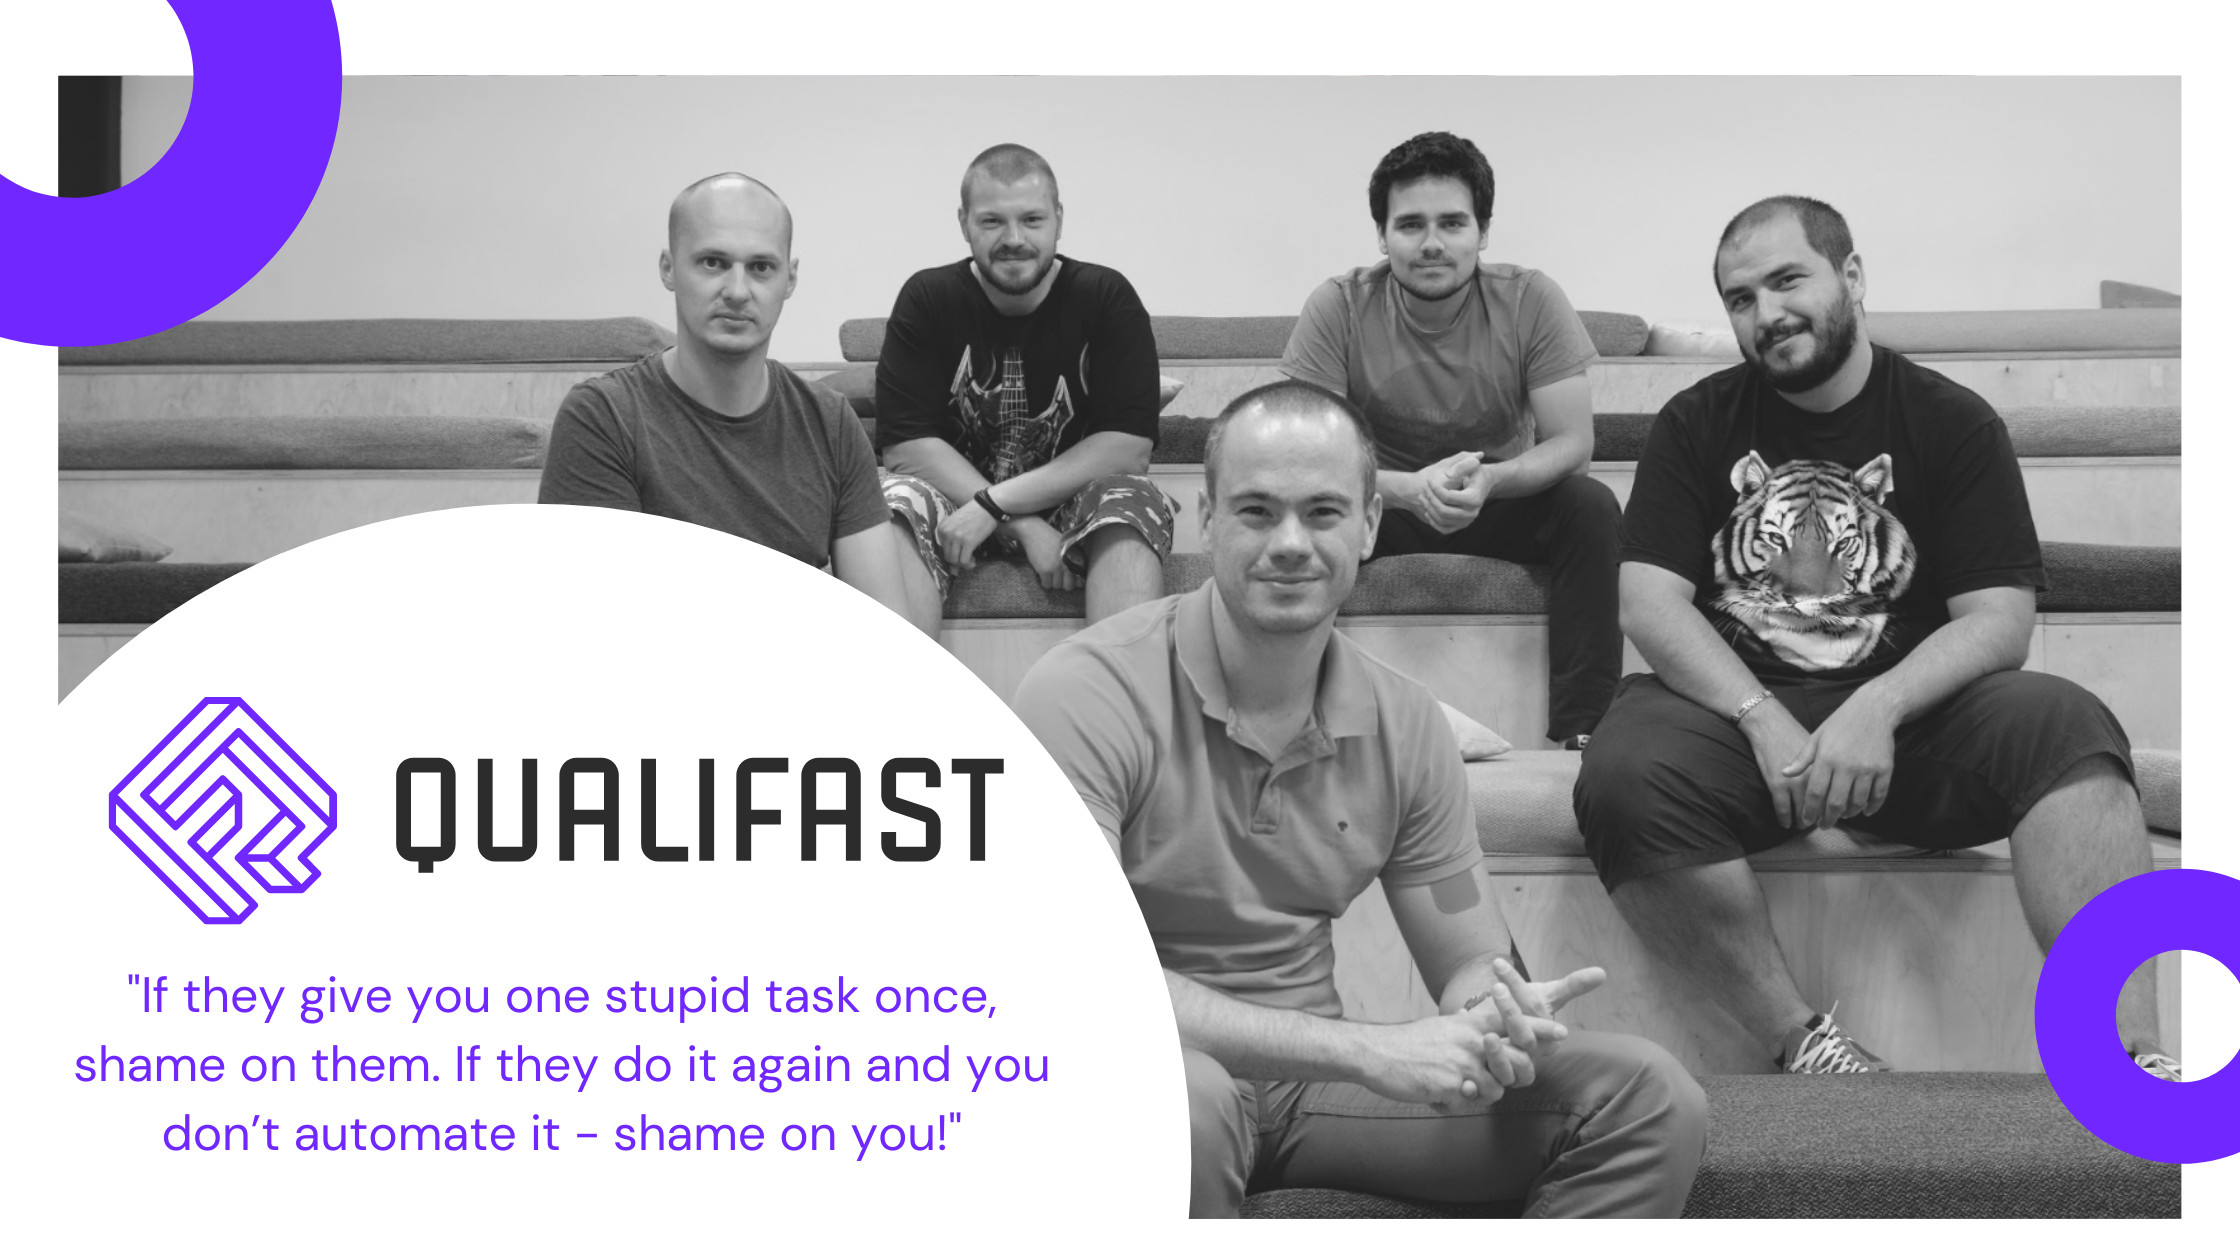 Qualifast: Technology solutions for startups and enterprises